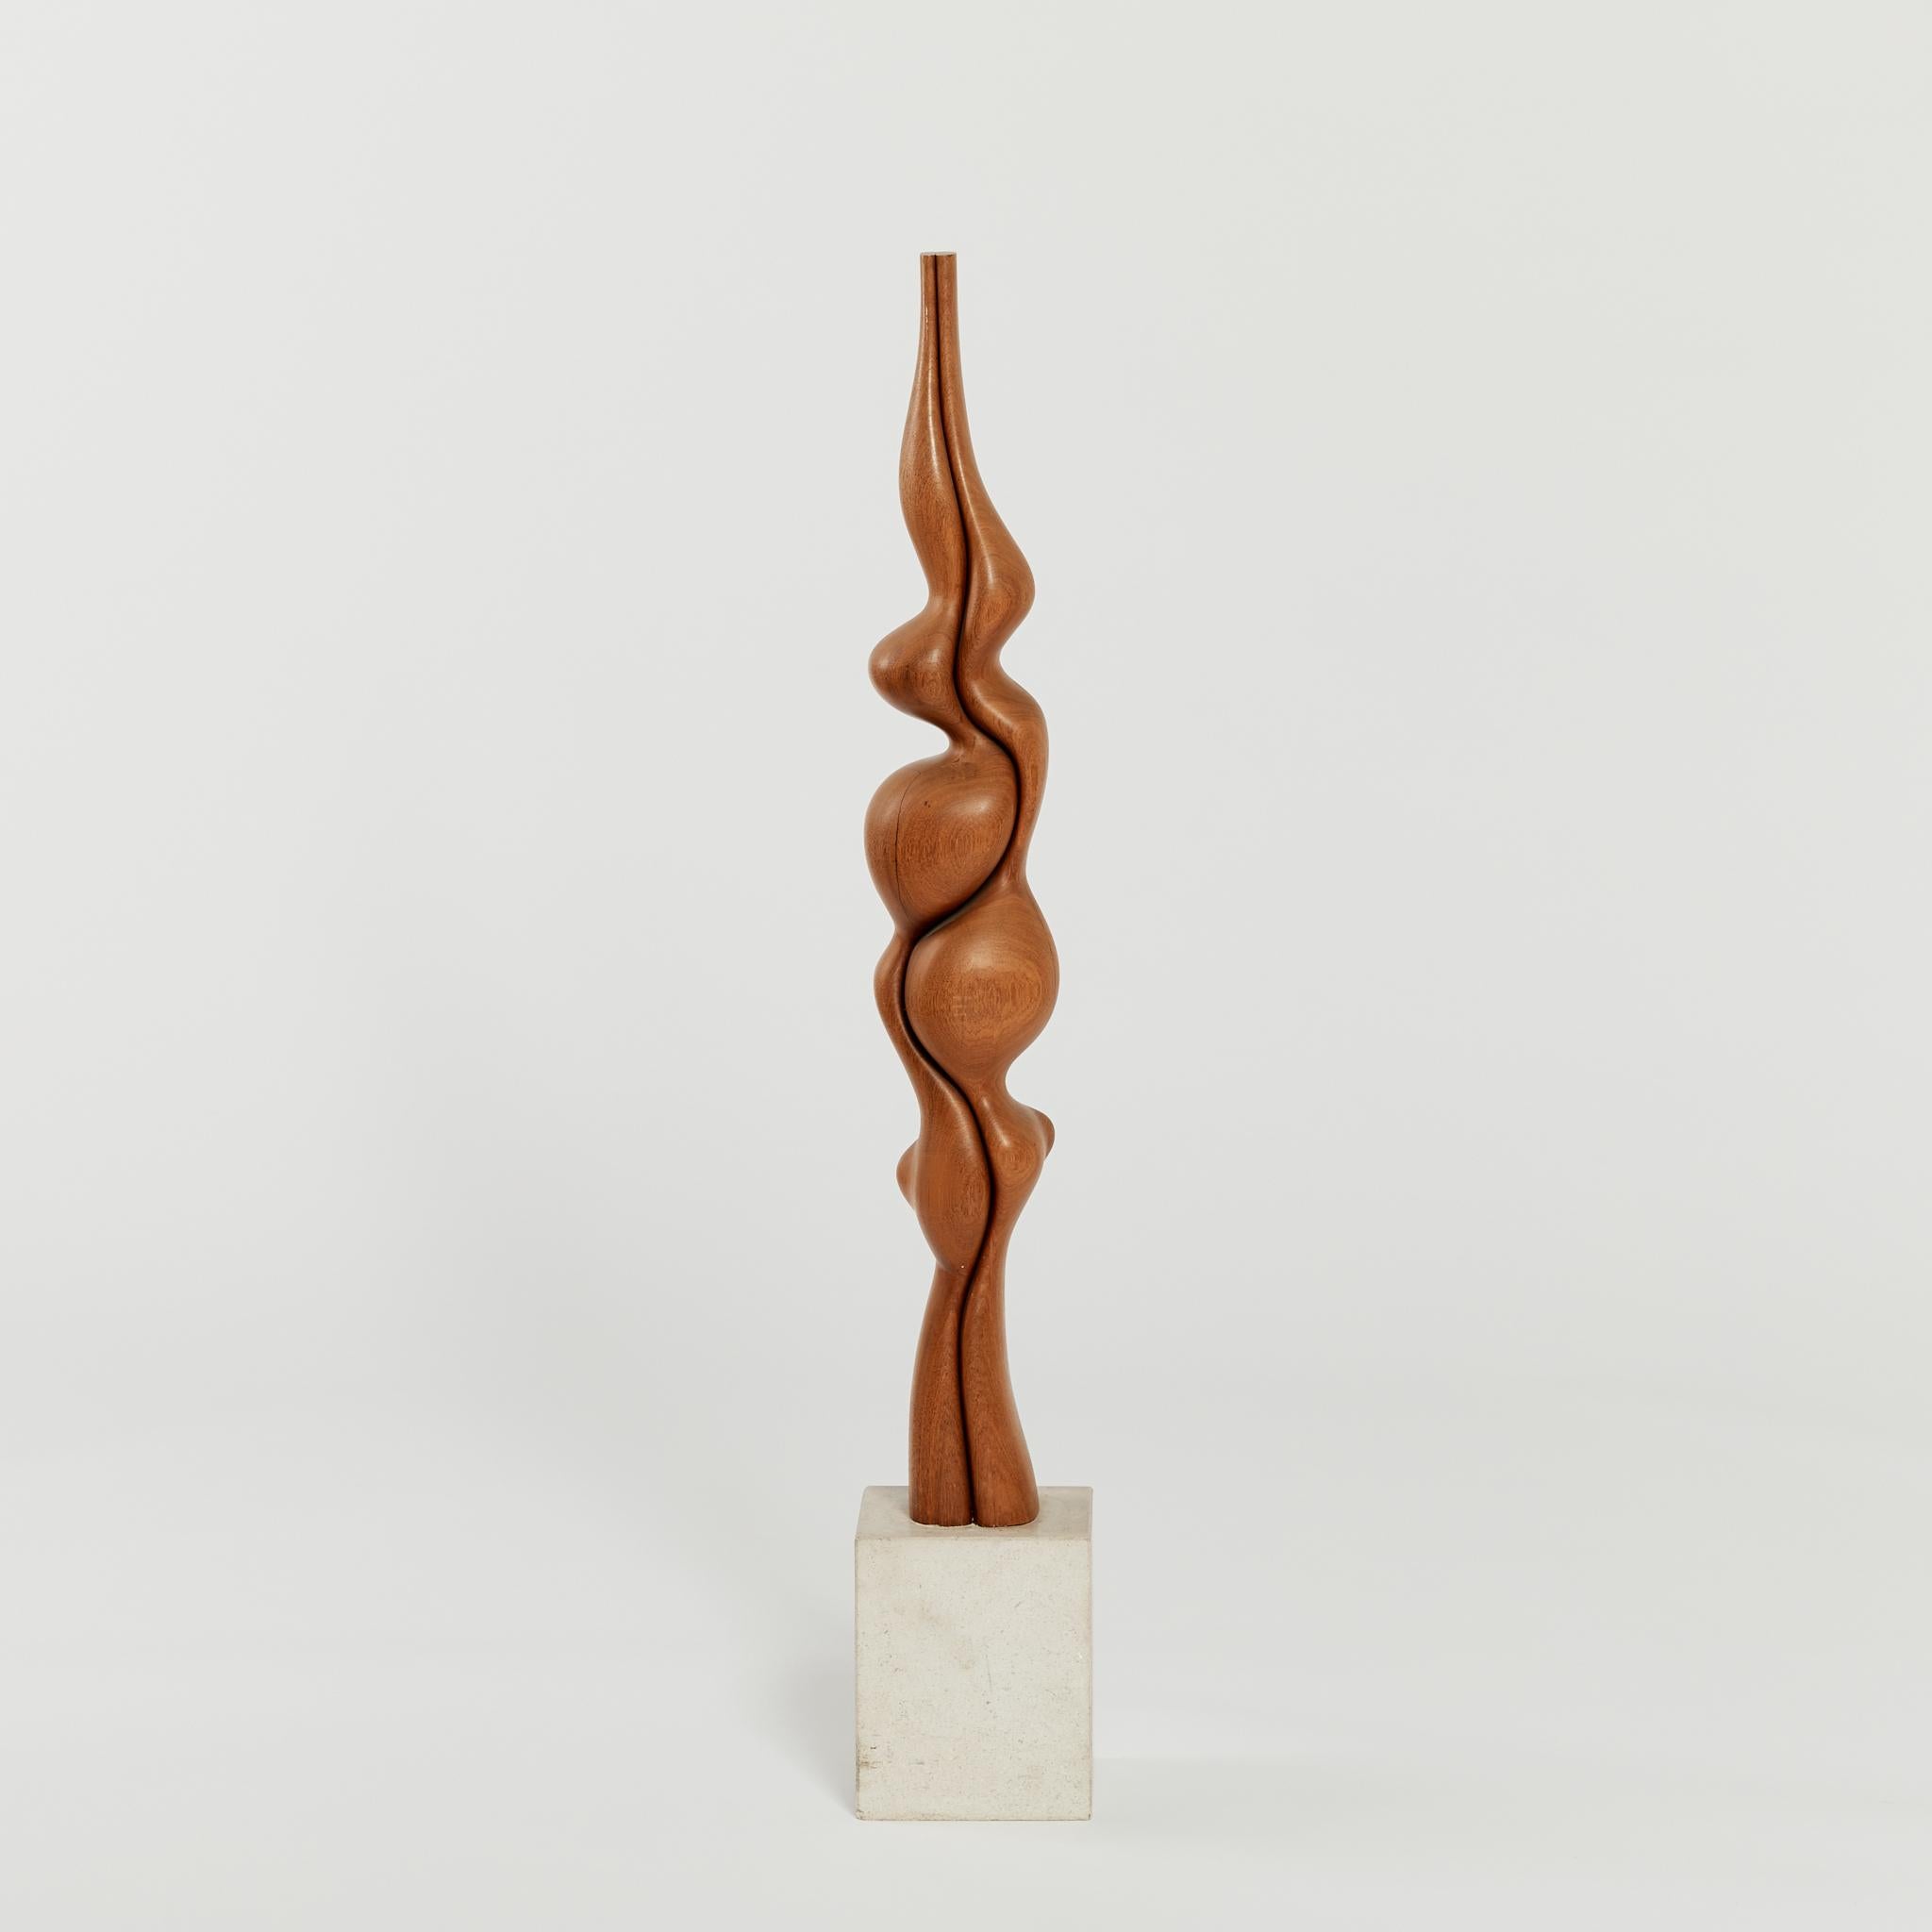 Tall biomorphic wood sculpture. Freestanding, with striking undulating form, this statement piece is mounted on a contrasting concrete plinth.

Artist: Unknown

Dimensions: H 107 x W 18 x D 18cm

Condition: Vintage condition - signs of wear on